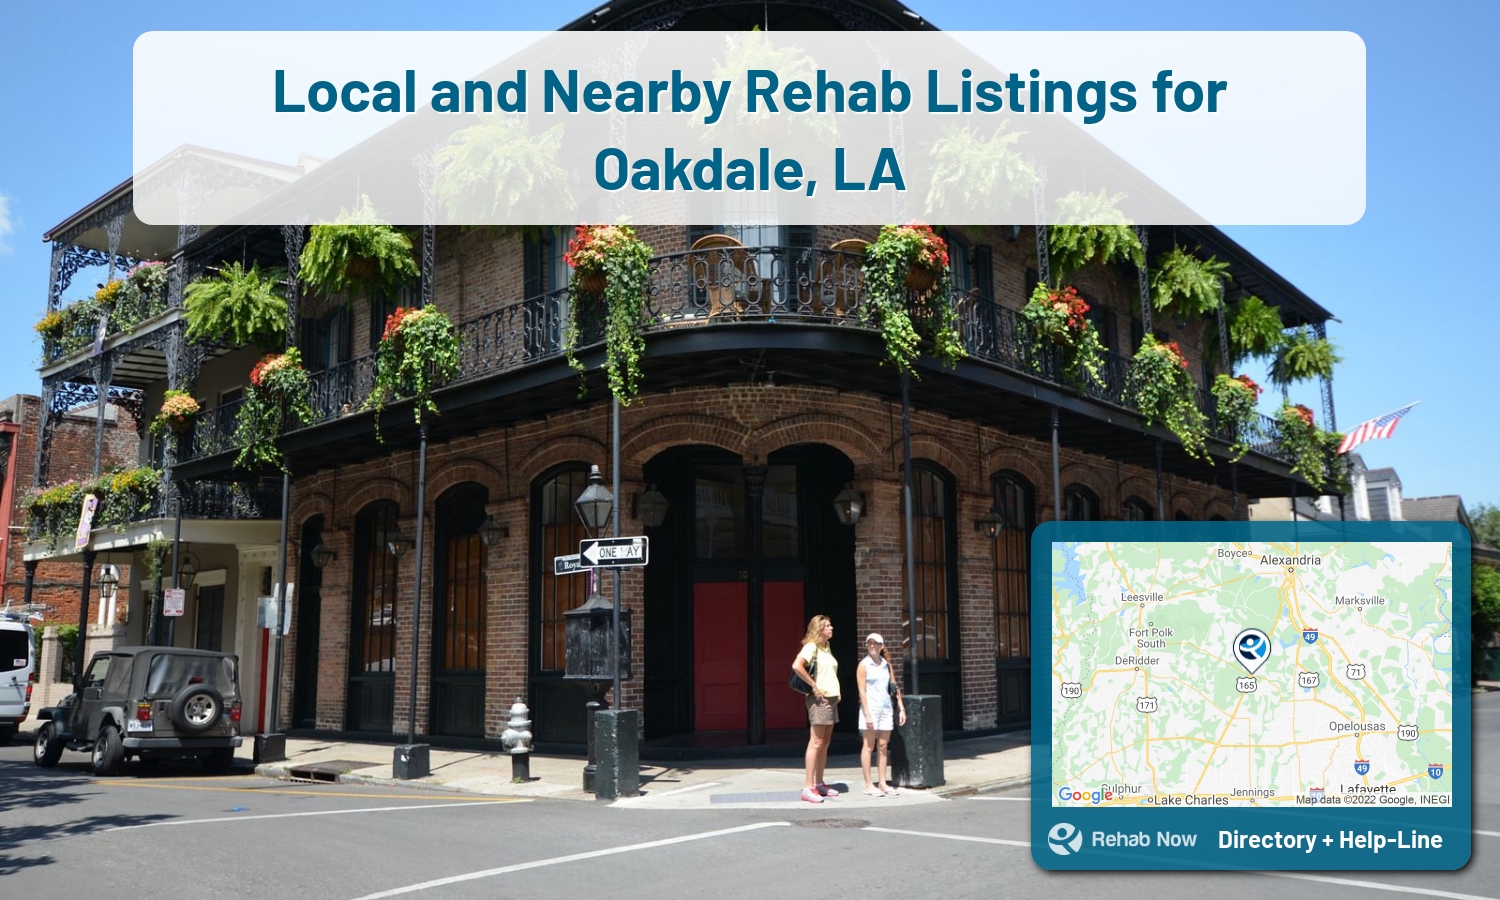 Oakdale, LA Treatment Centers. Find drug rehab in Oakdale, Louisiana, or detox and treatment programs. Get the right help now!